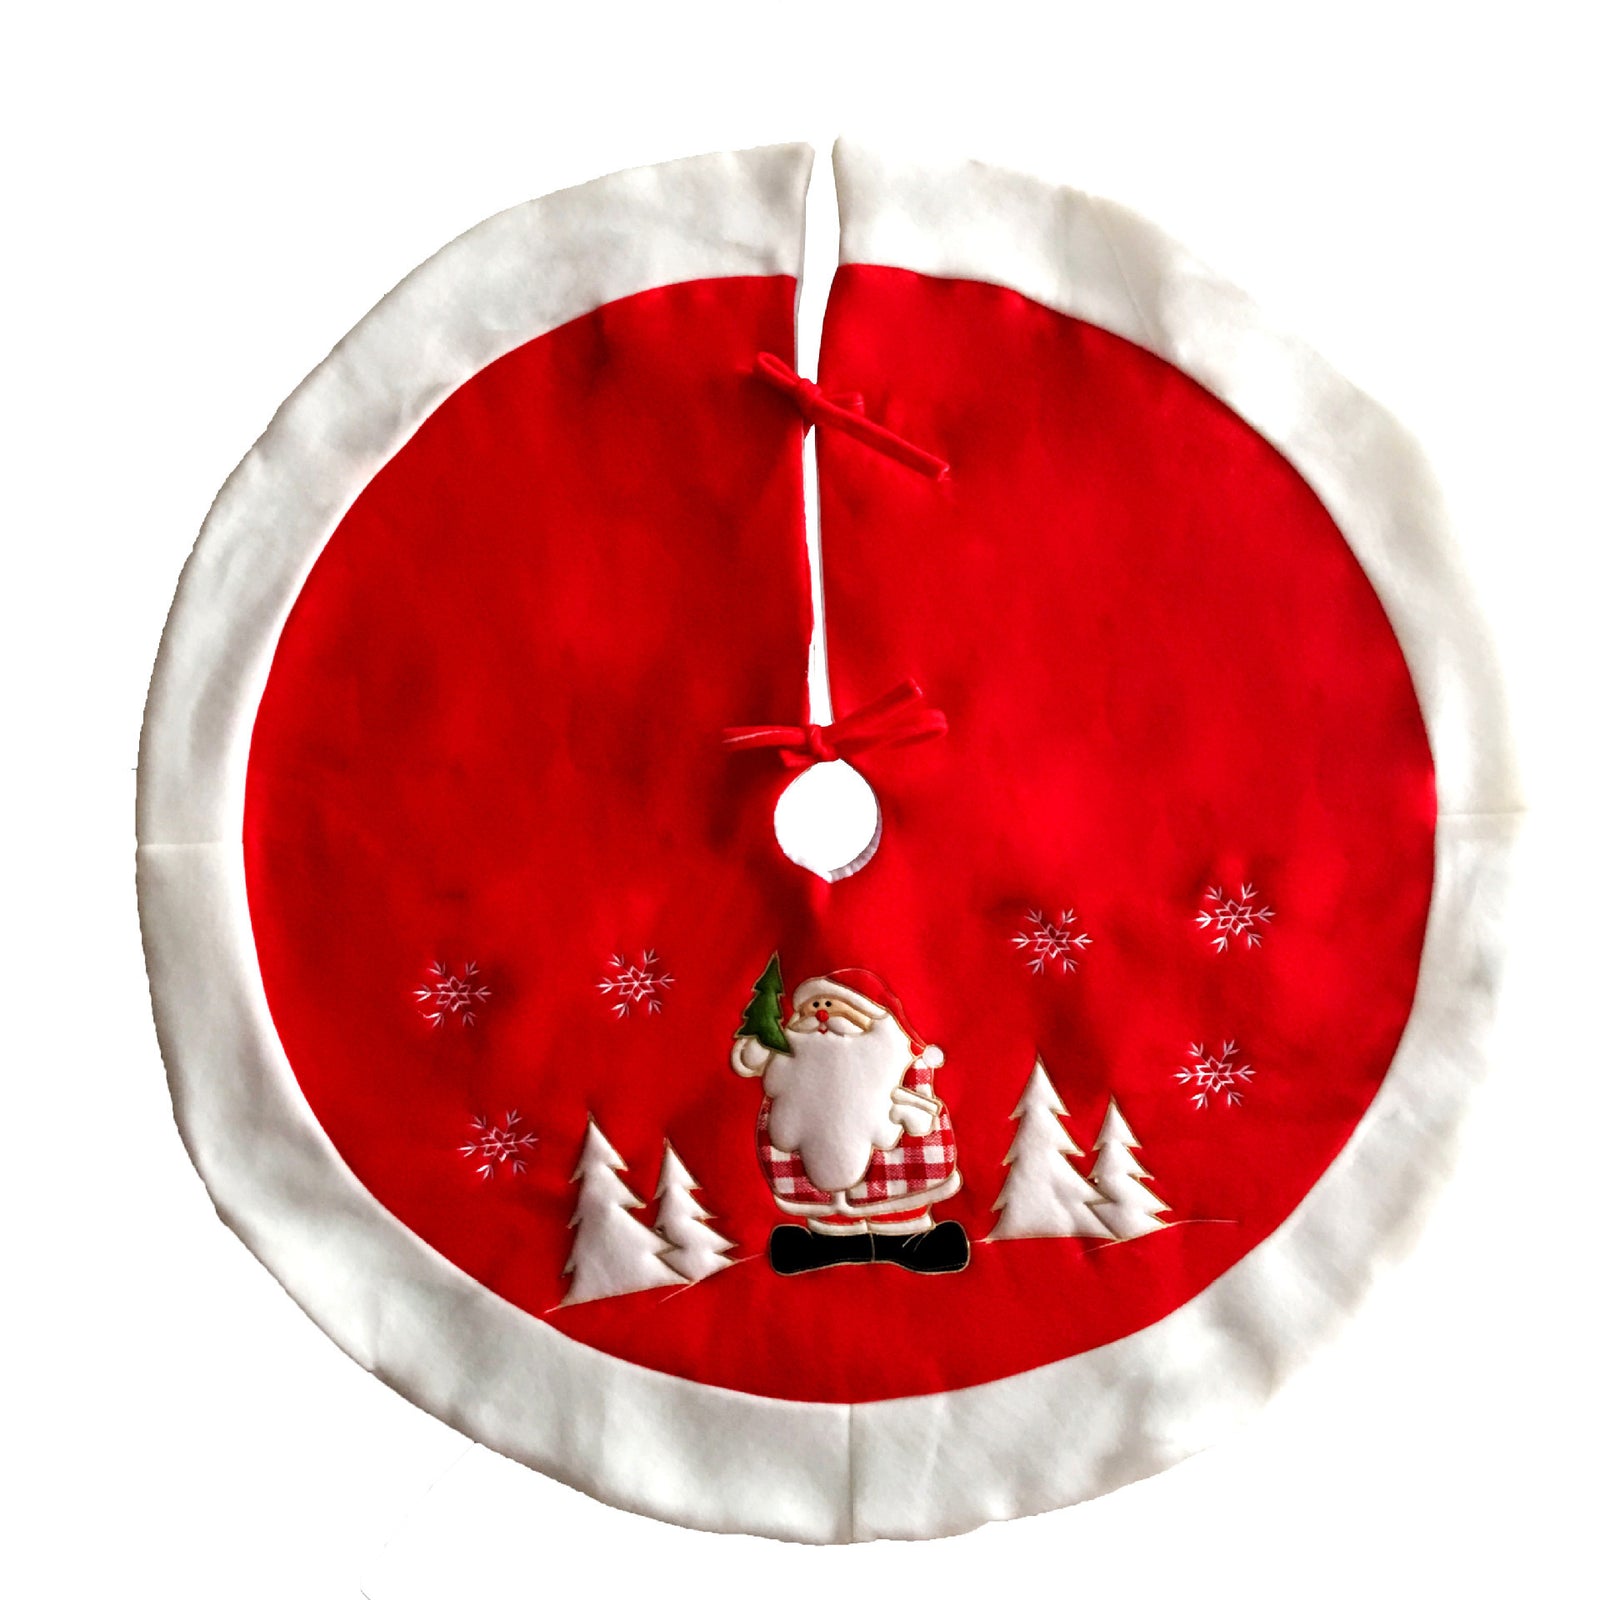 Christmas Decoration Christmas Tree Skirt: A festive Christmas tree skirt adorned with seasonal patterns, perfect for adding a touch of holiday cheer to your tree.